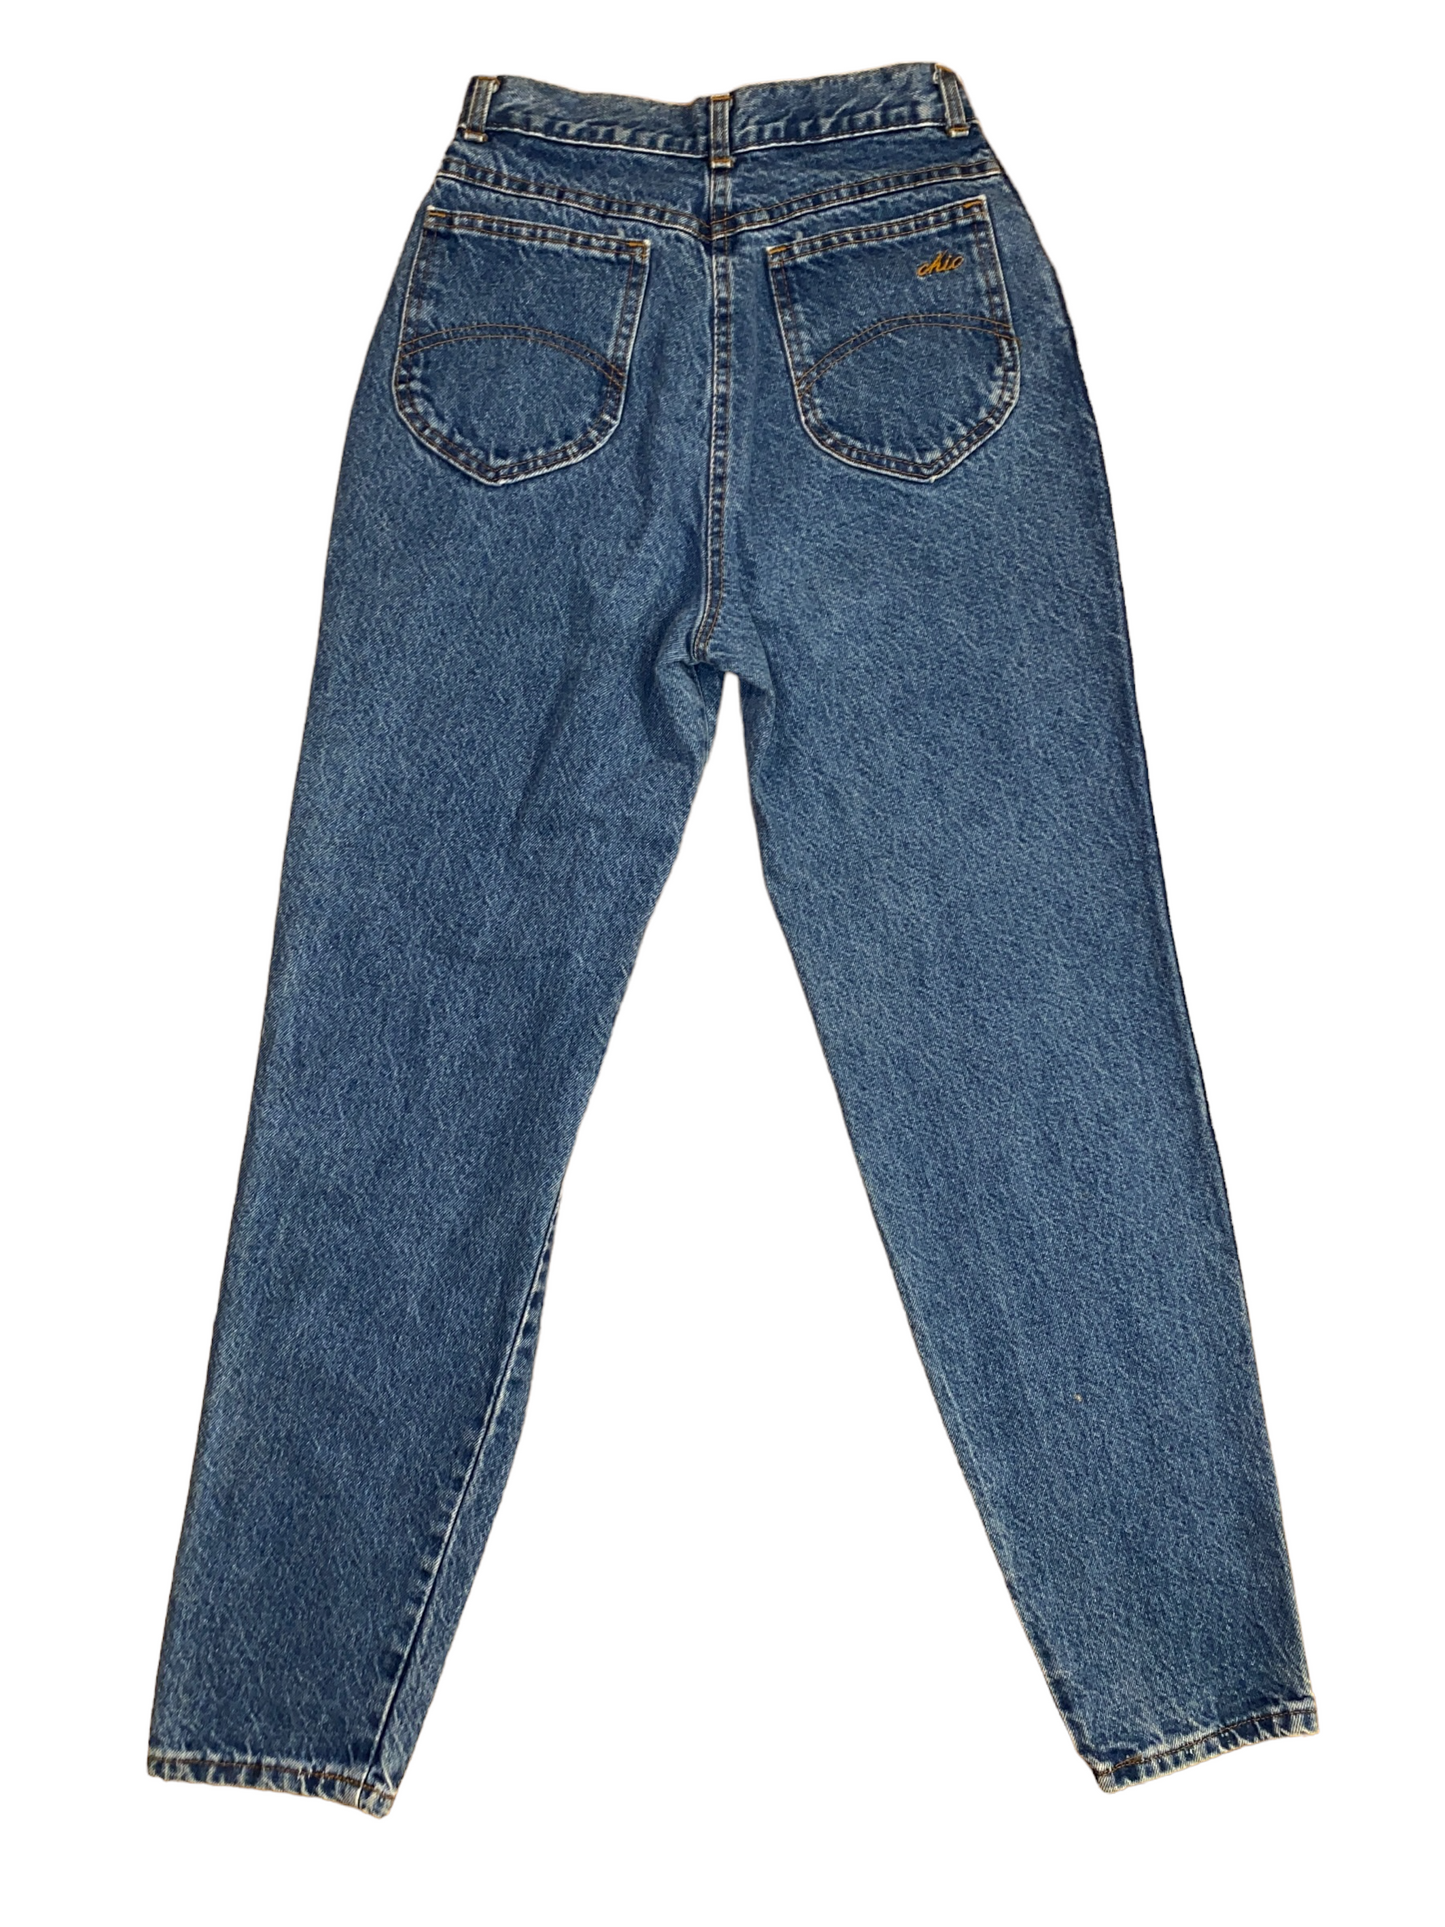 1980s Chic Jeans Tapered Leg